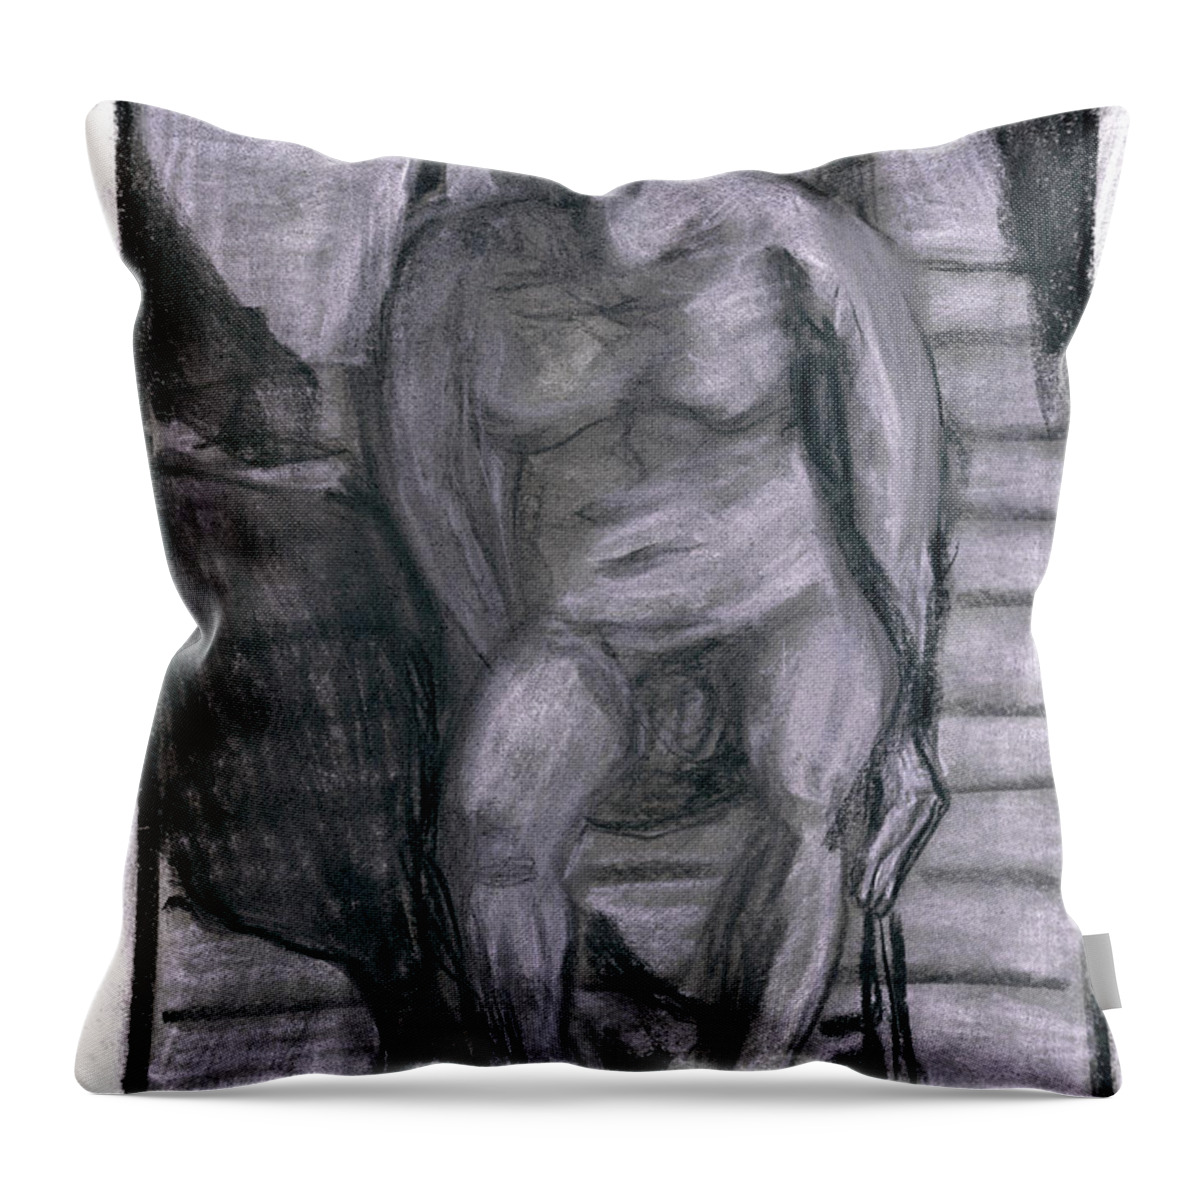 Chair Throw Pillow featuring the drawing Self on a chair by Edgeworth Johnstone